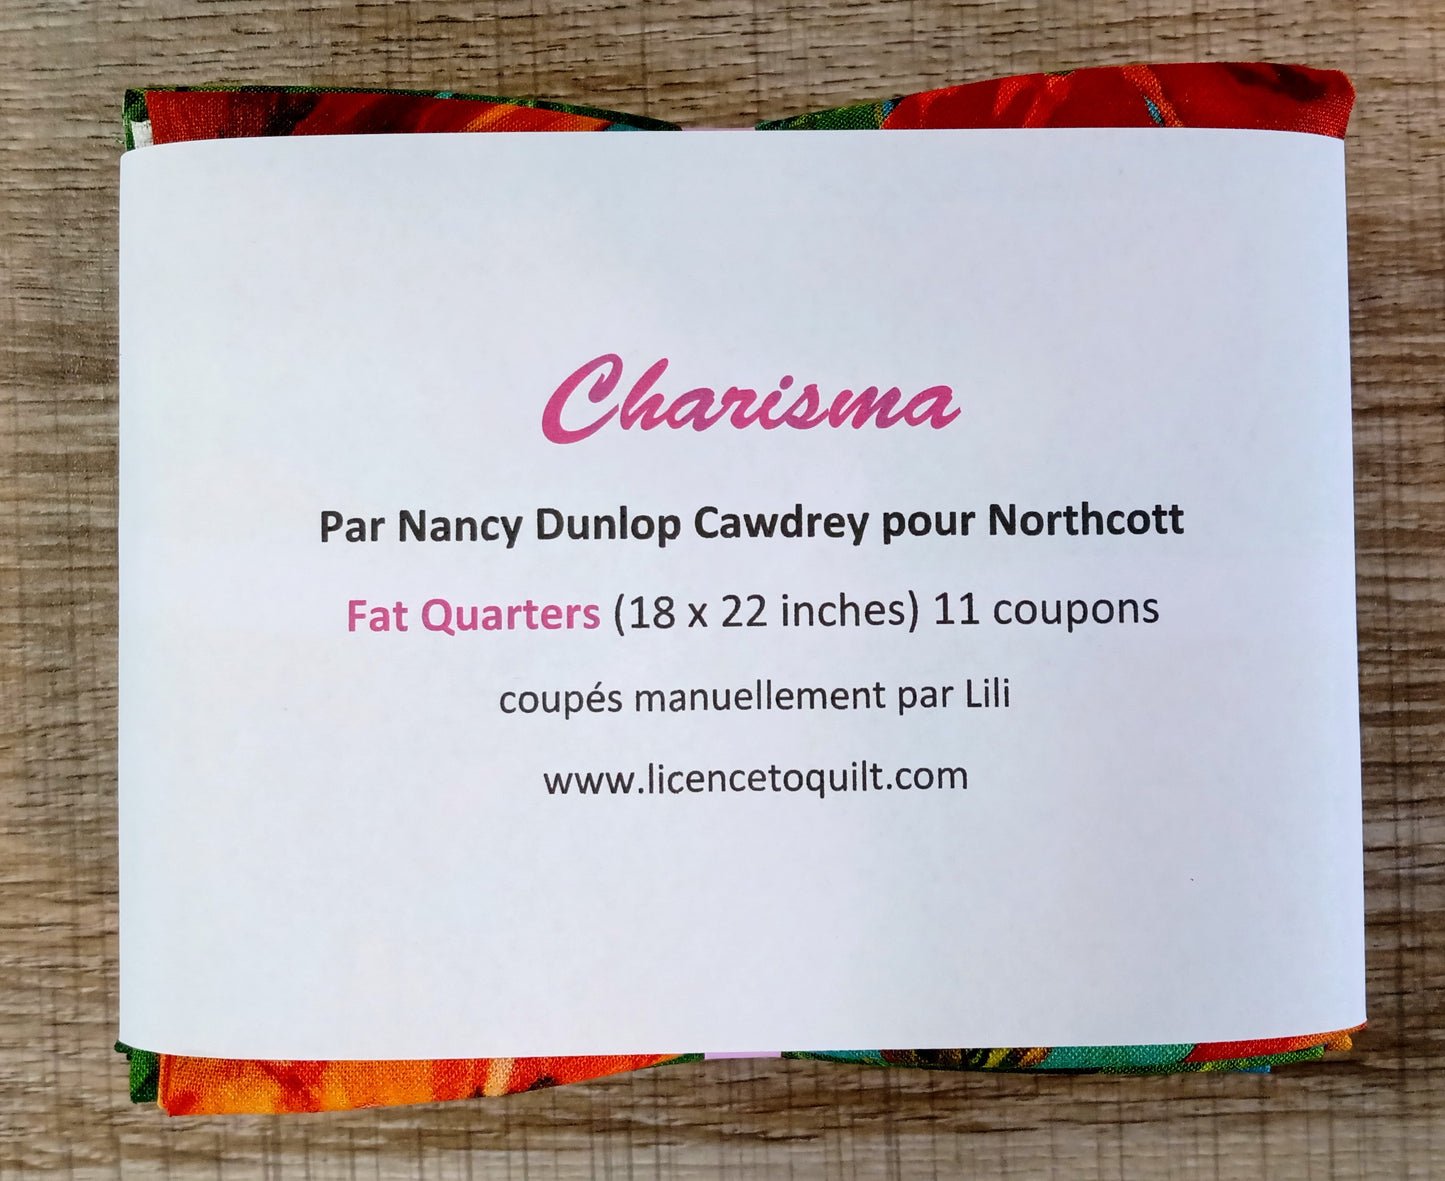 Charisma - Fat Quarters (11) - Licence To Quilt